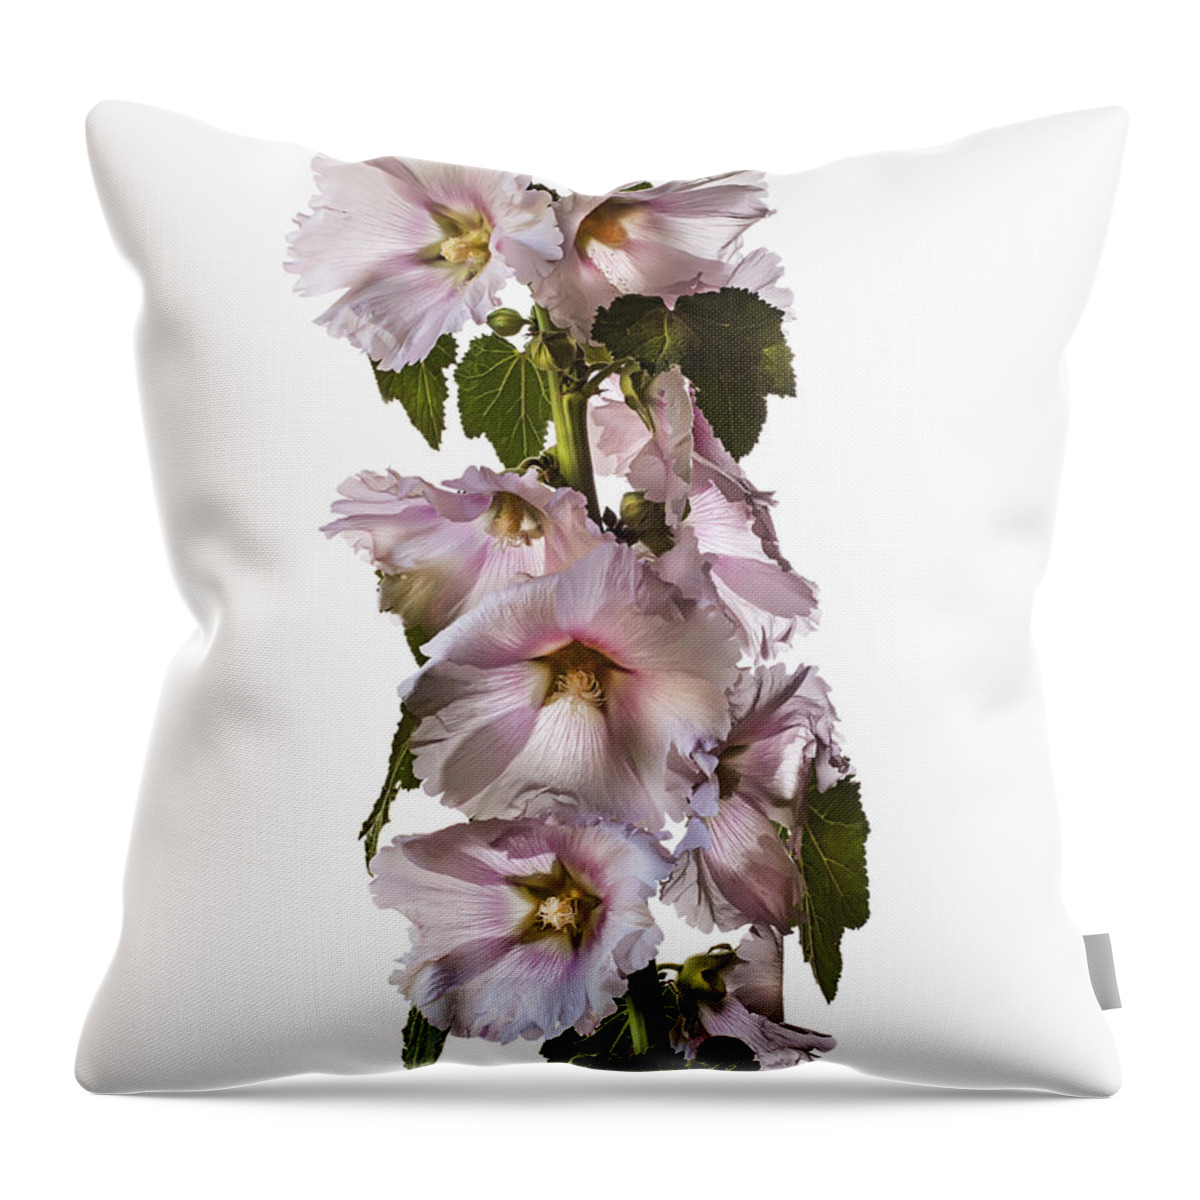 Flower Throw Pillow featuring the photograph Hollyhock #3 by Endre Balogh